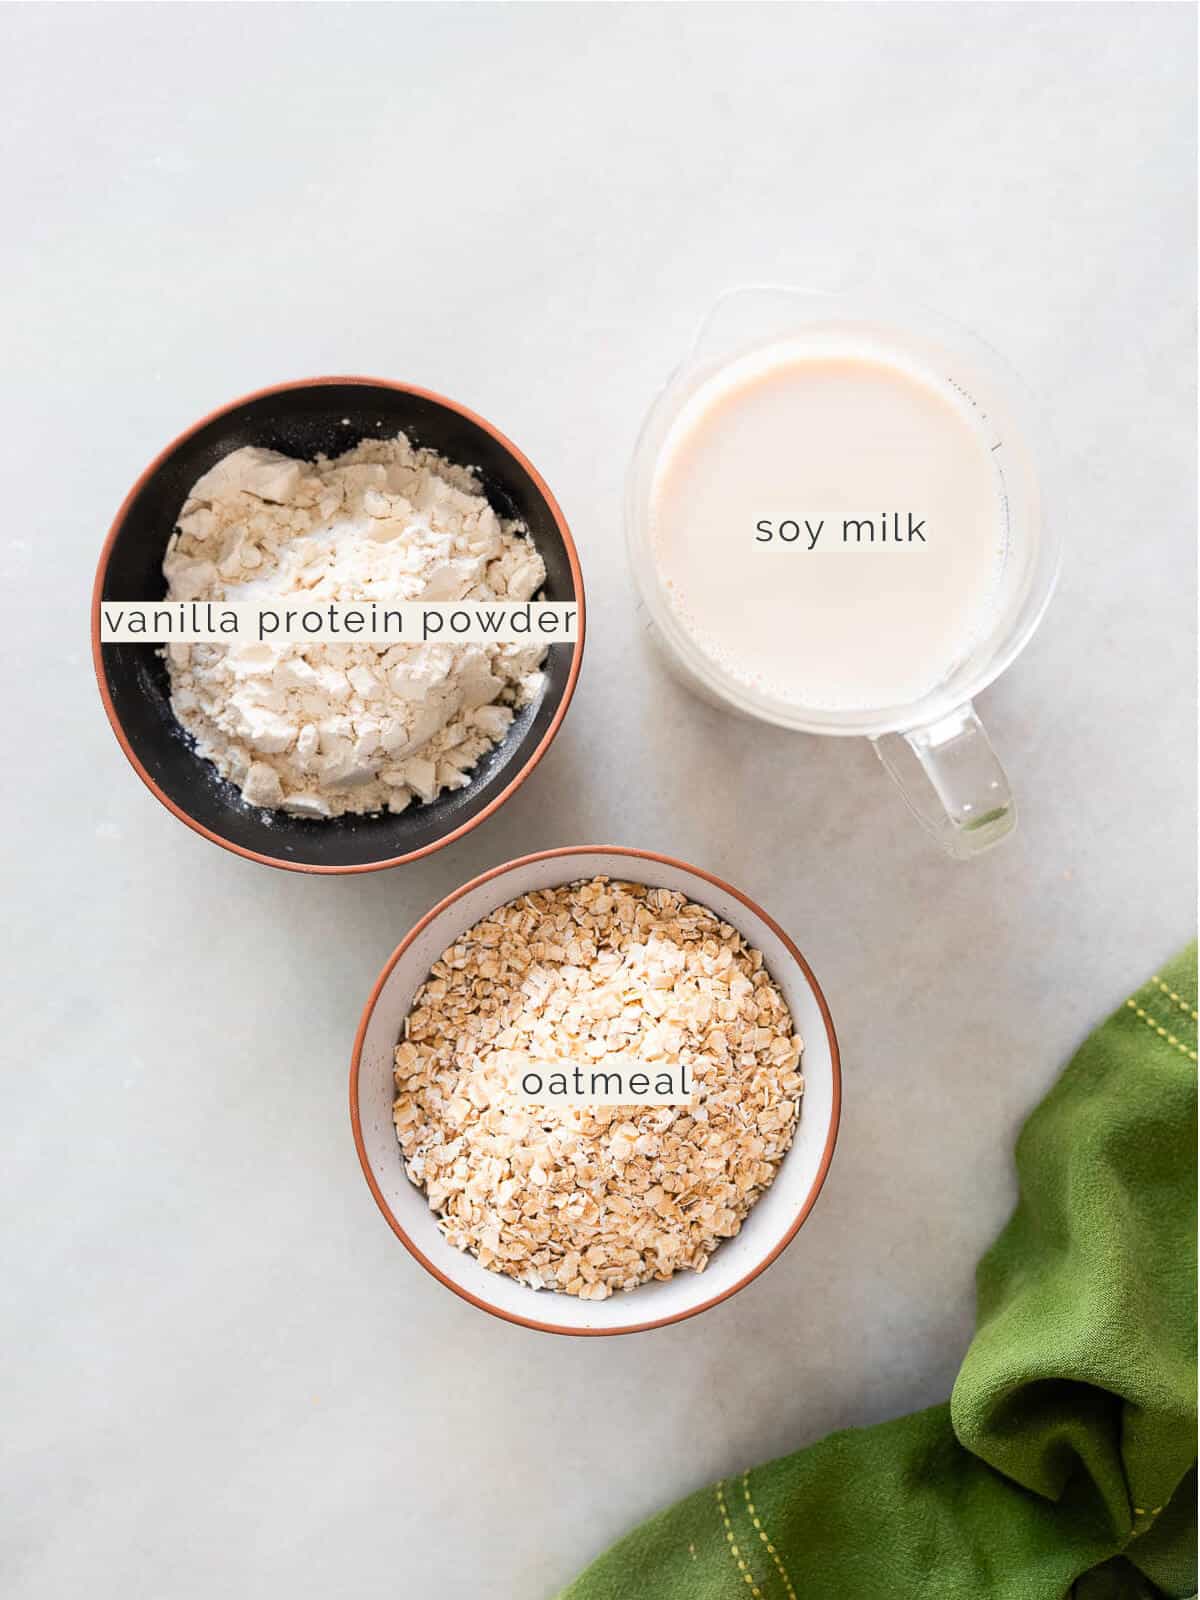 ingredients to make this 3-ingredient high-protein oatmeal recipe.